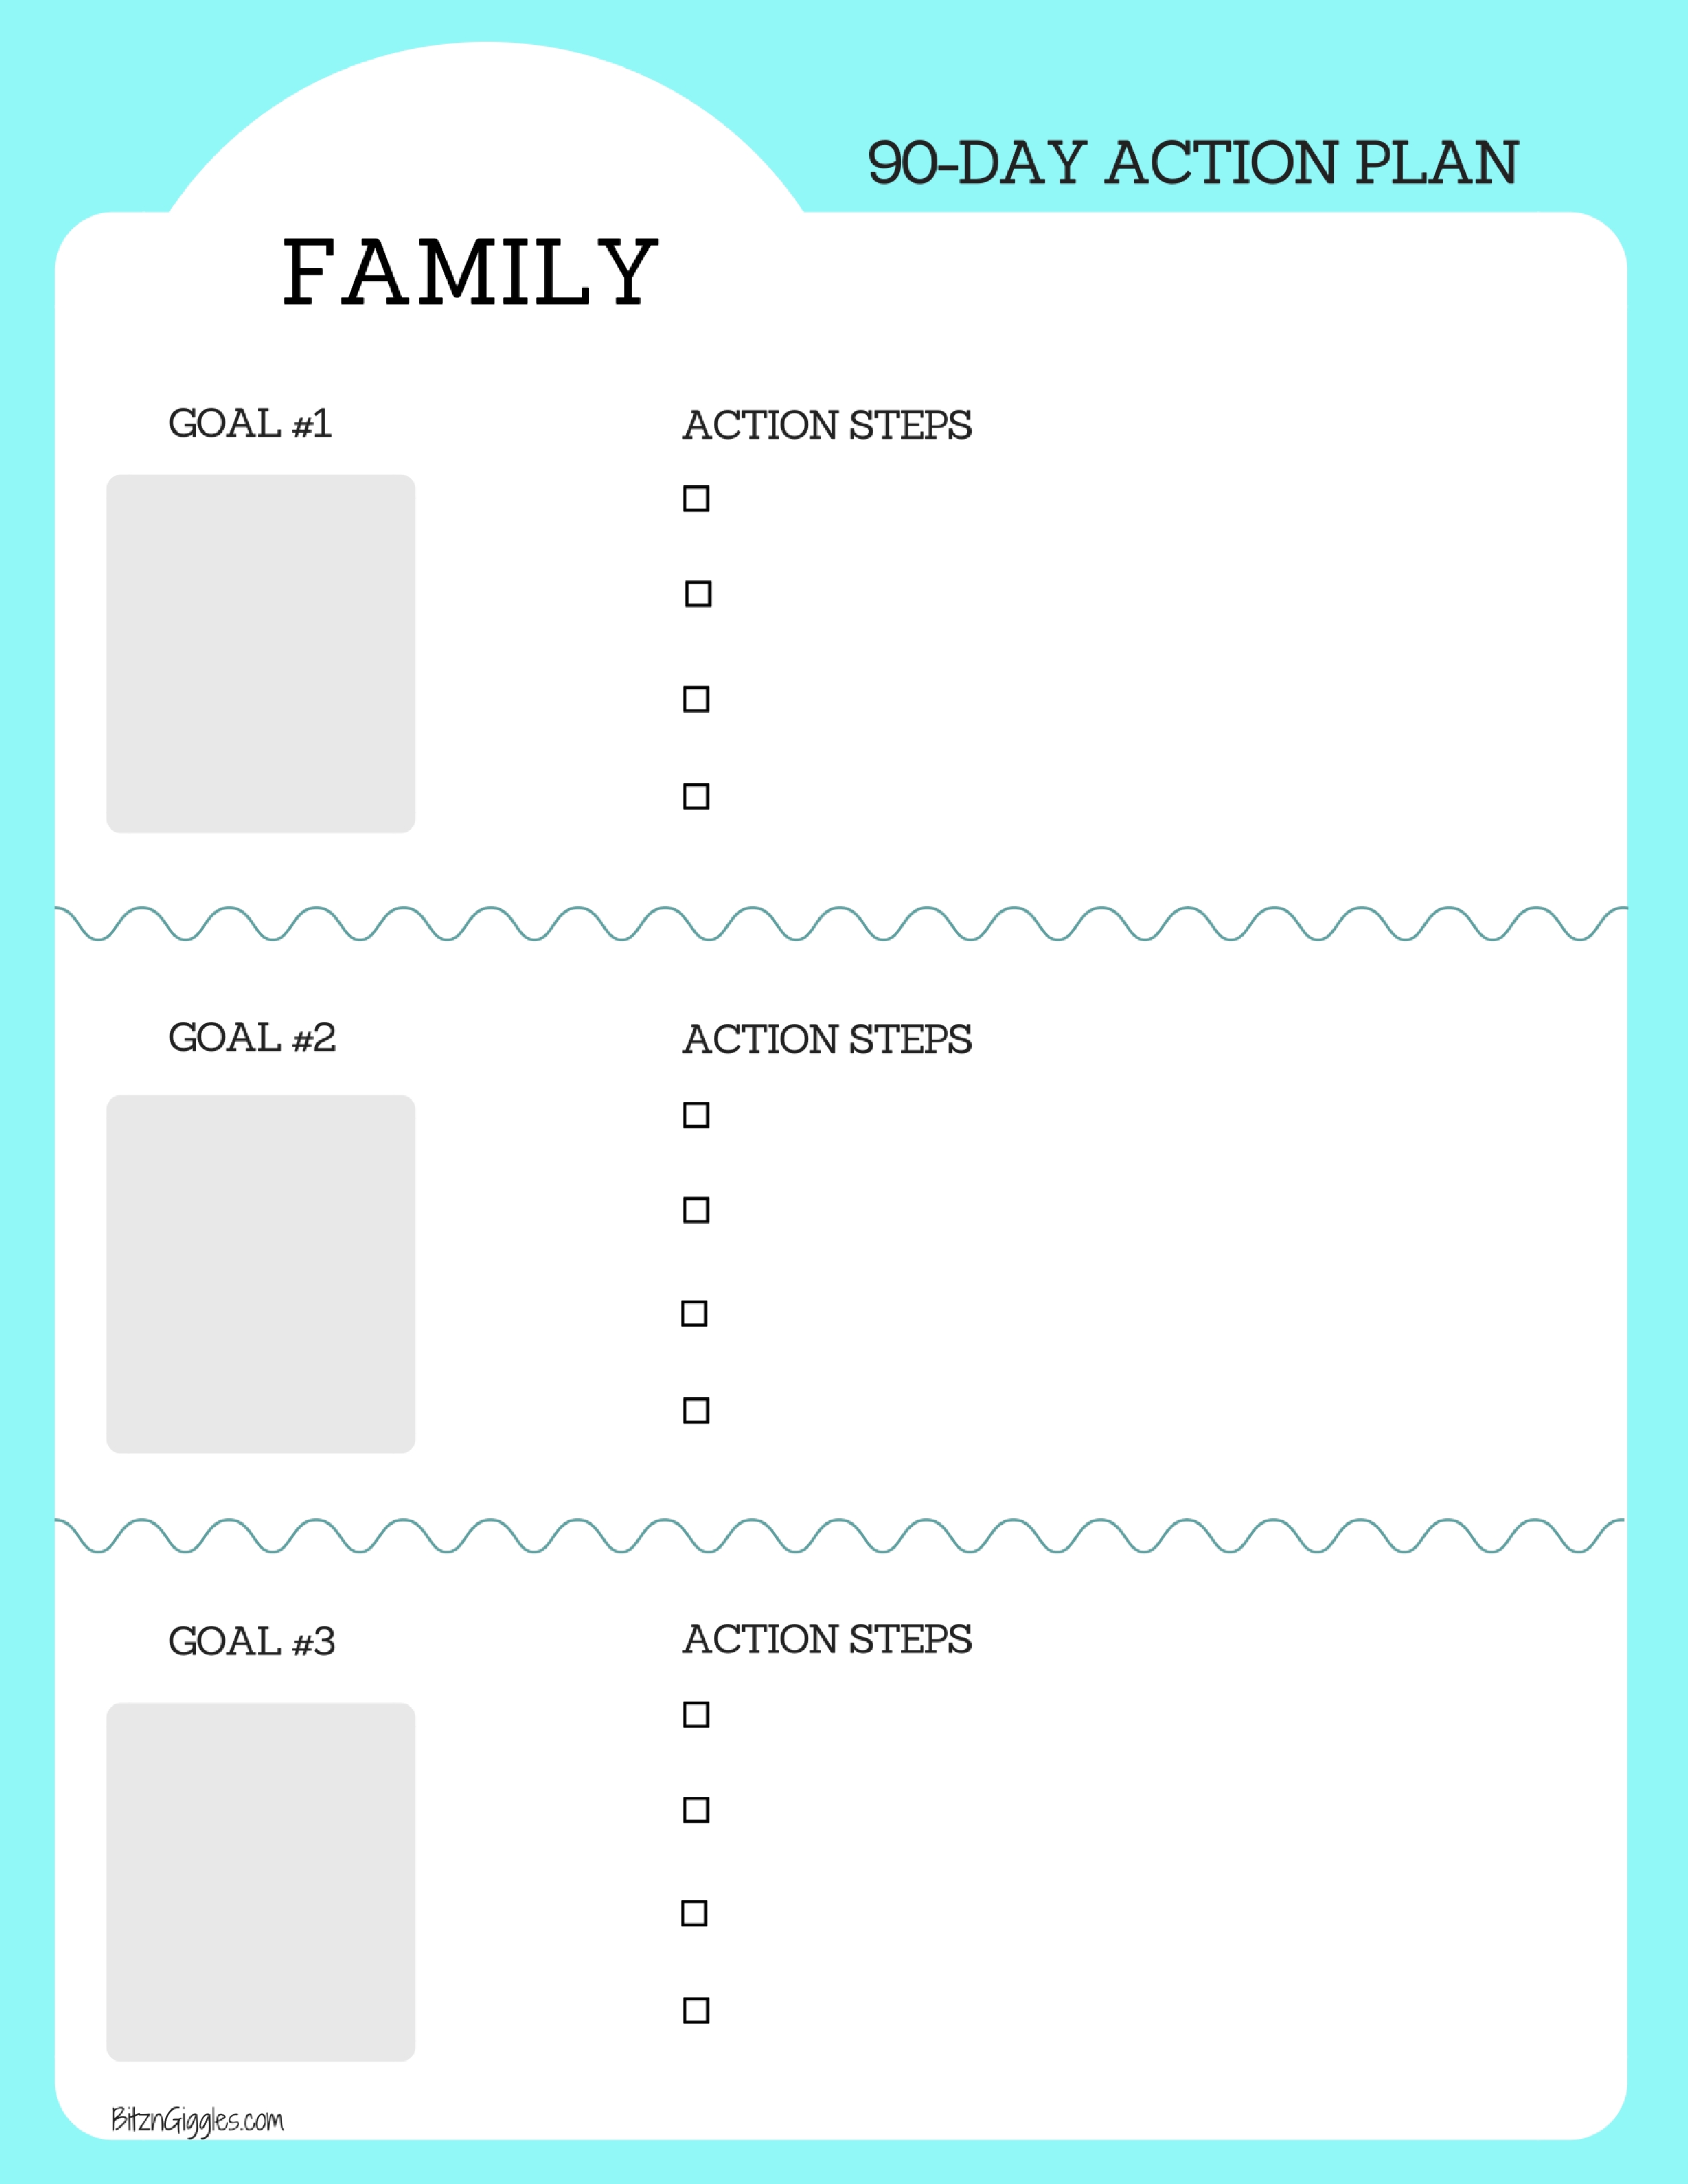 Family Goal Setting Printable - Free 90-day action plan printable to help your family set manageable goals you can work together to achieve. 